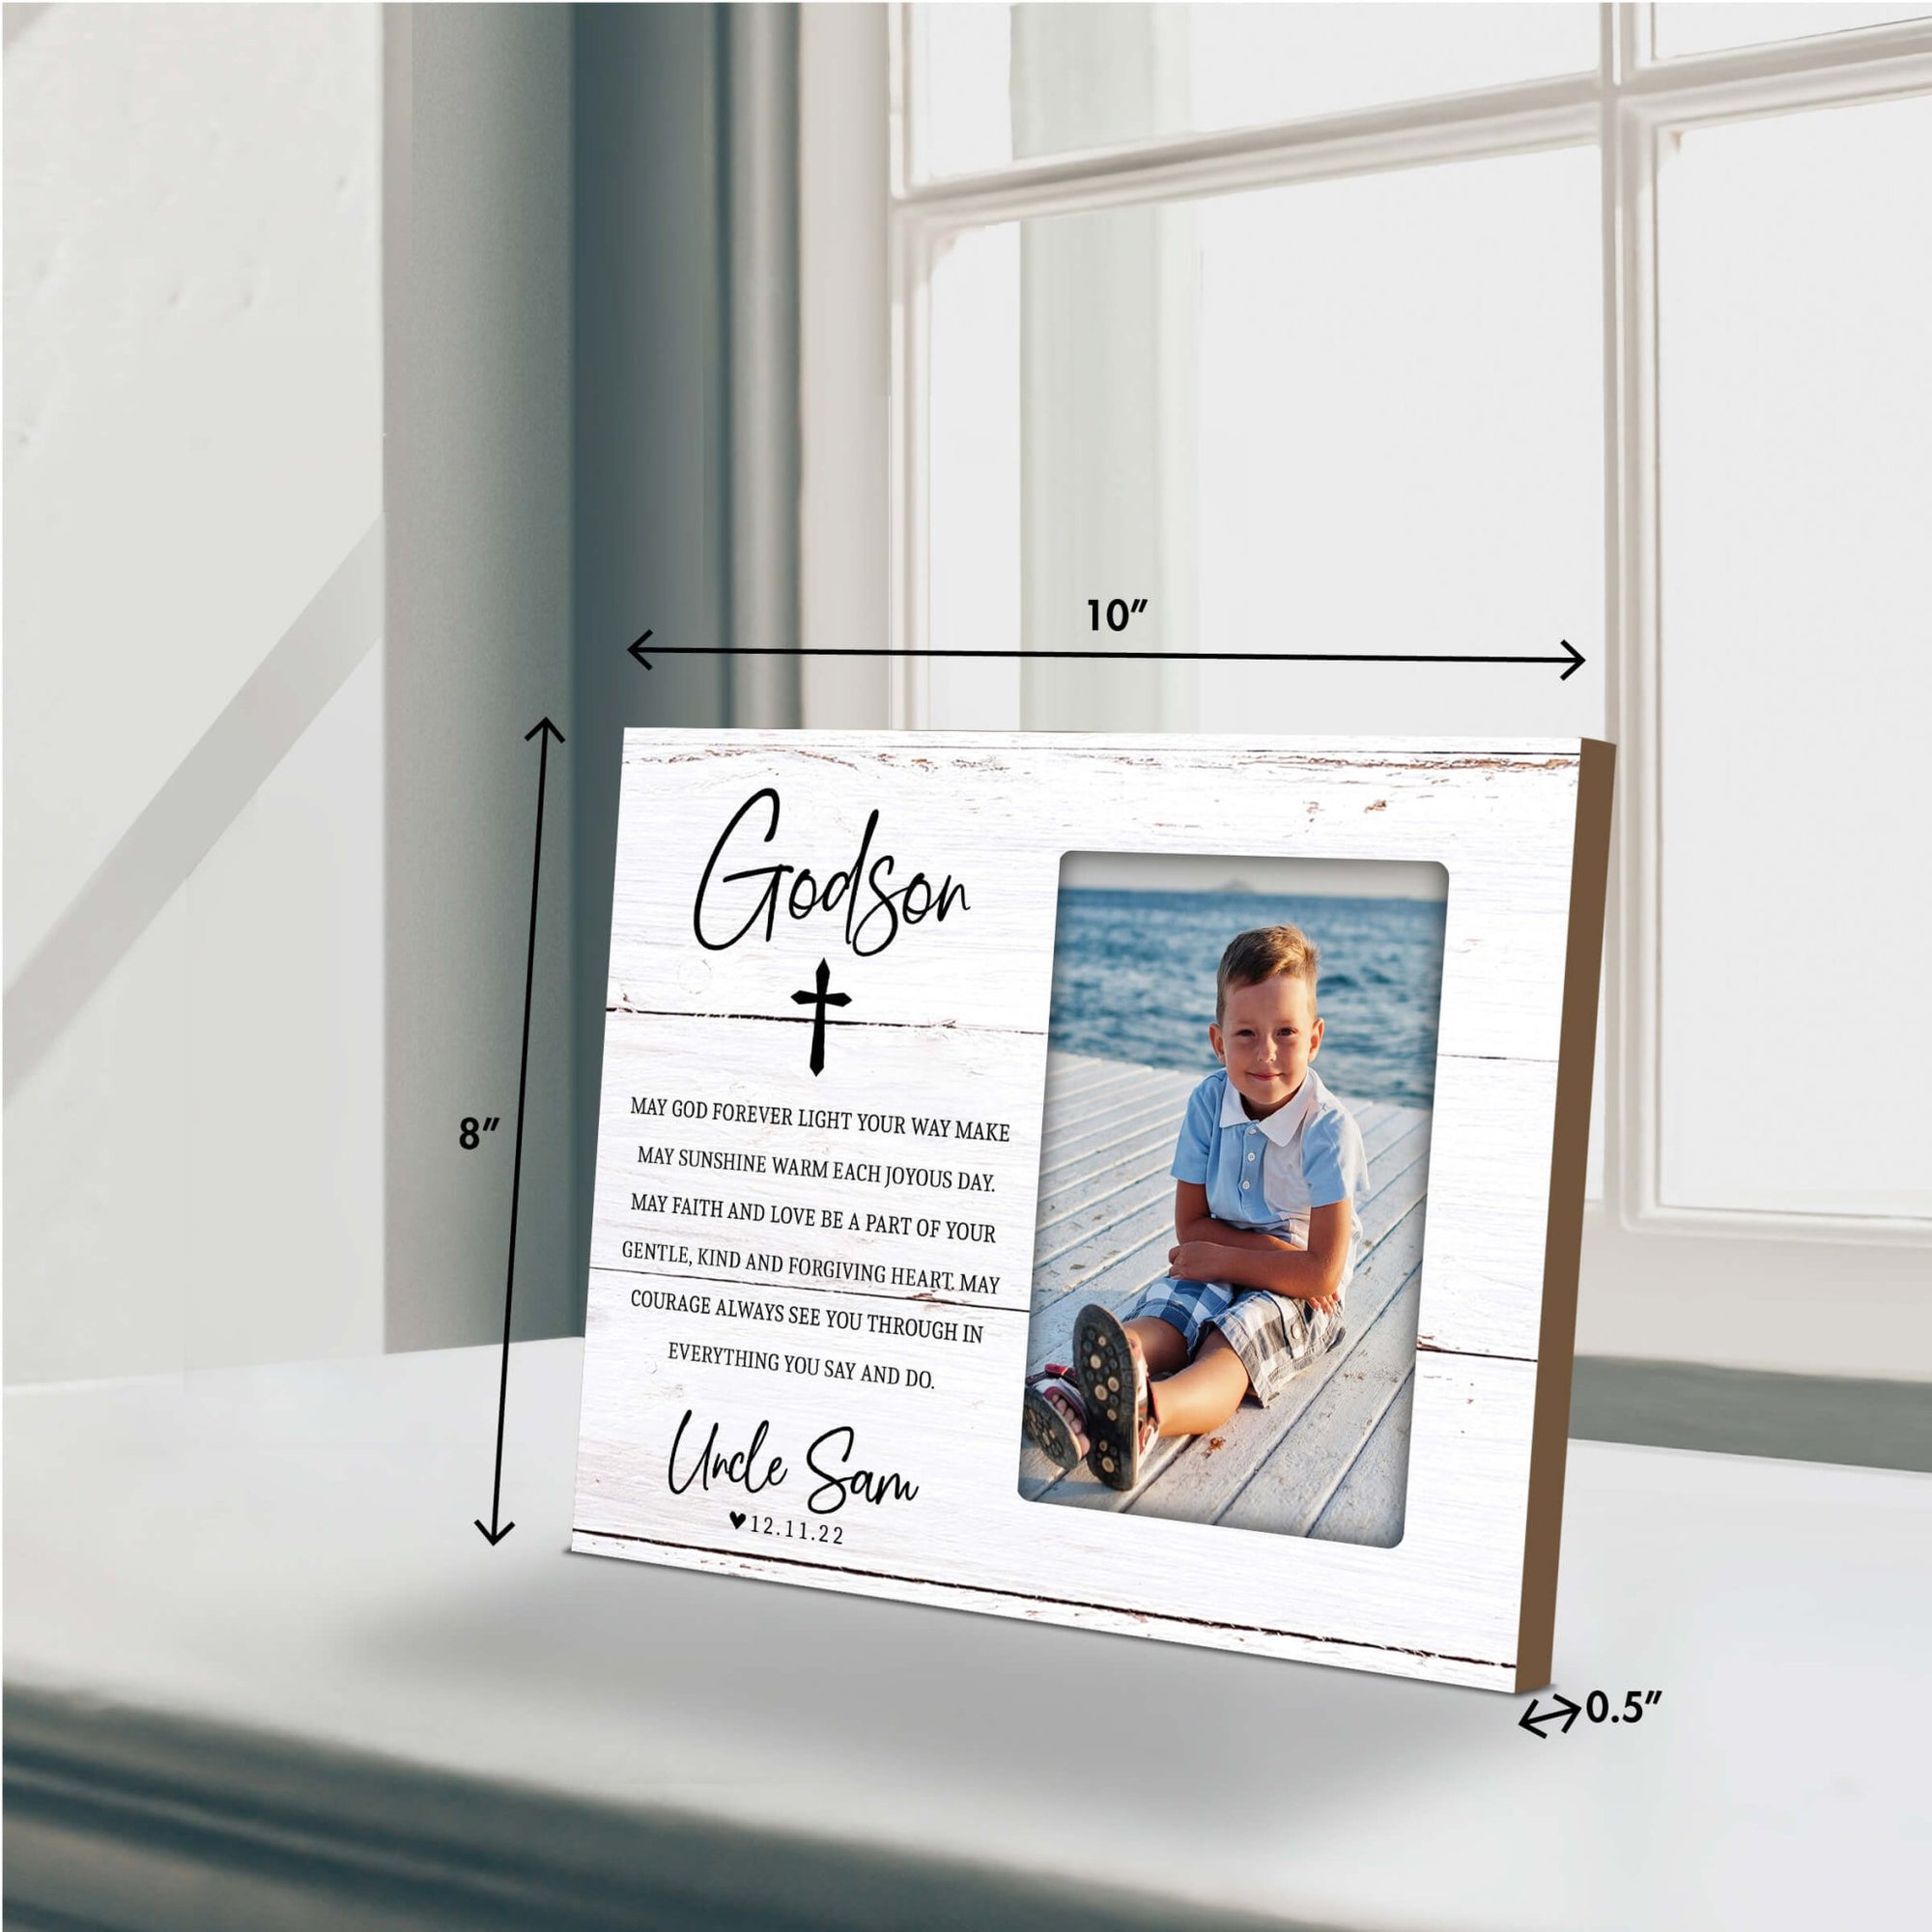 Personalized Wooden Picture Frame for Godson - LifeSong Milestones